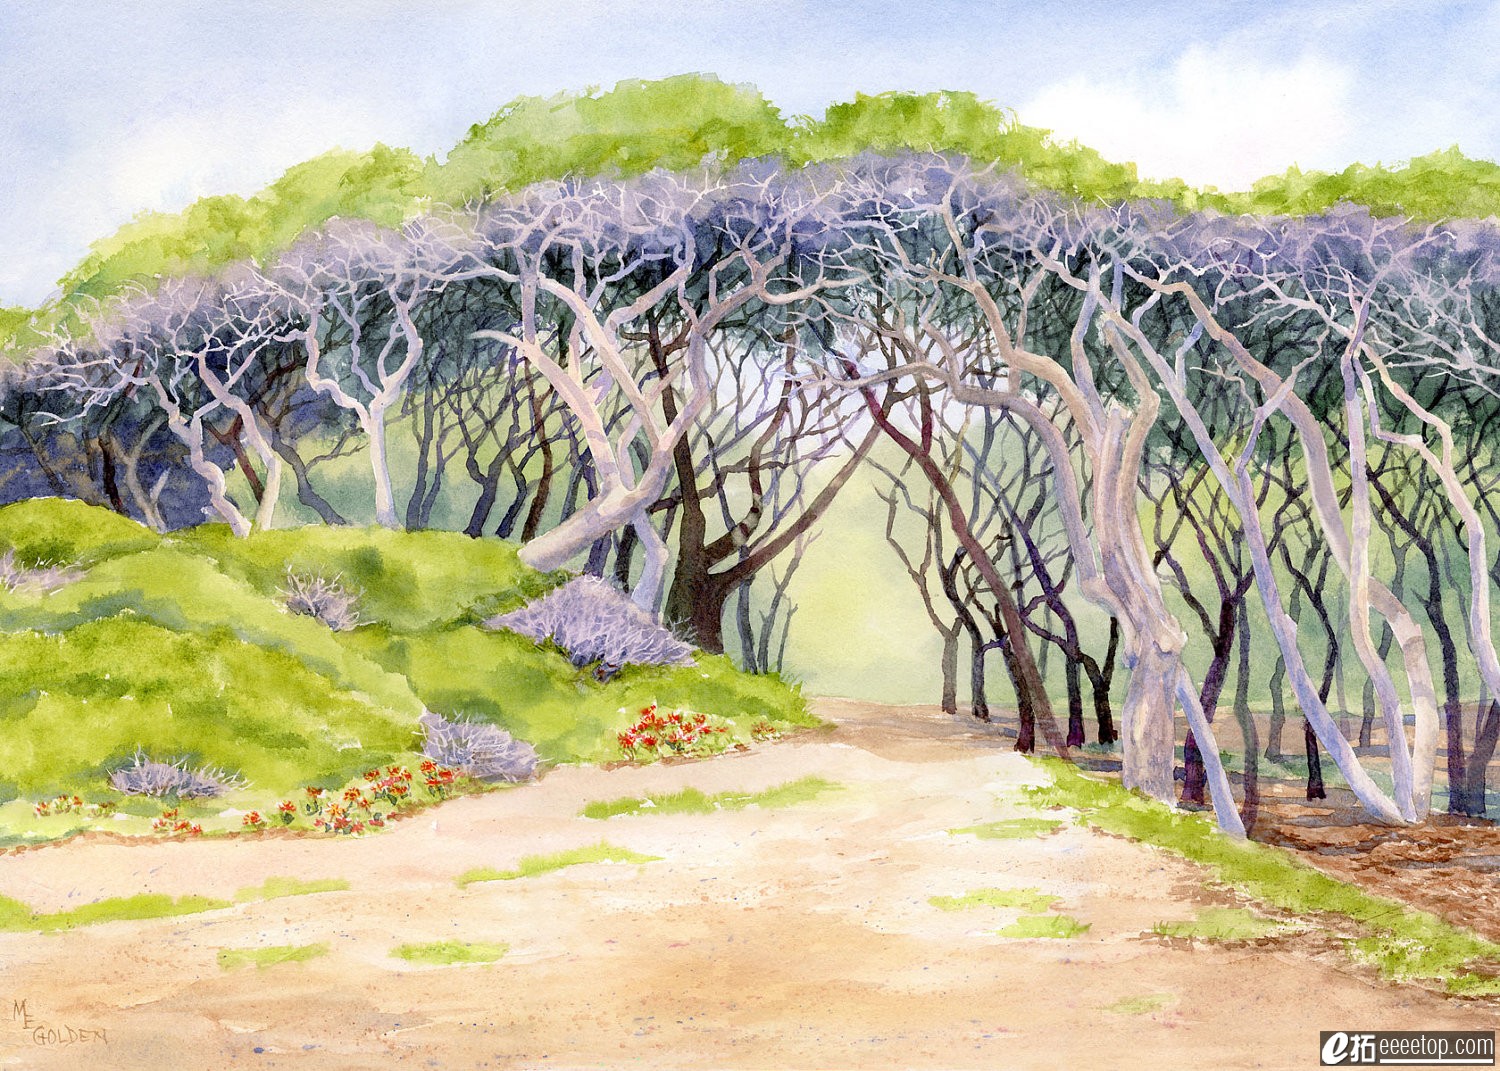 Canopy of Weathered Trees at Fort Fisher giclee.jpg